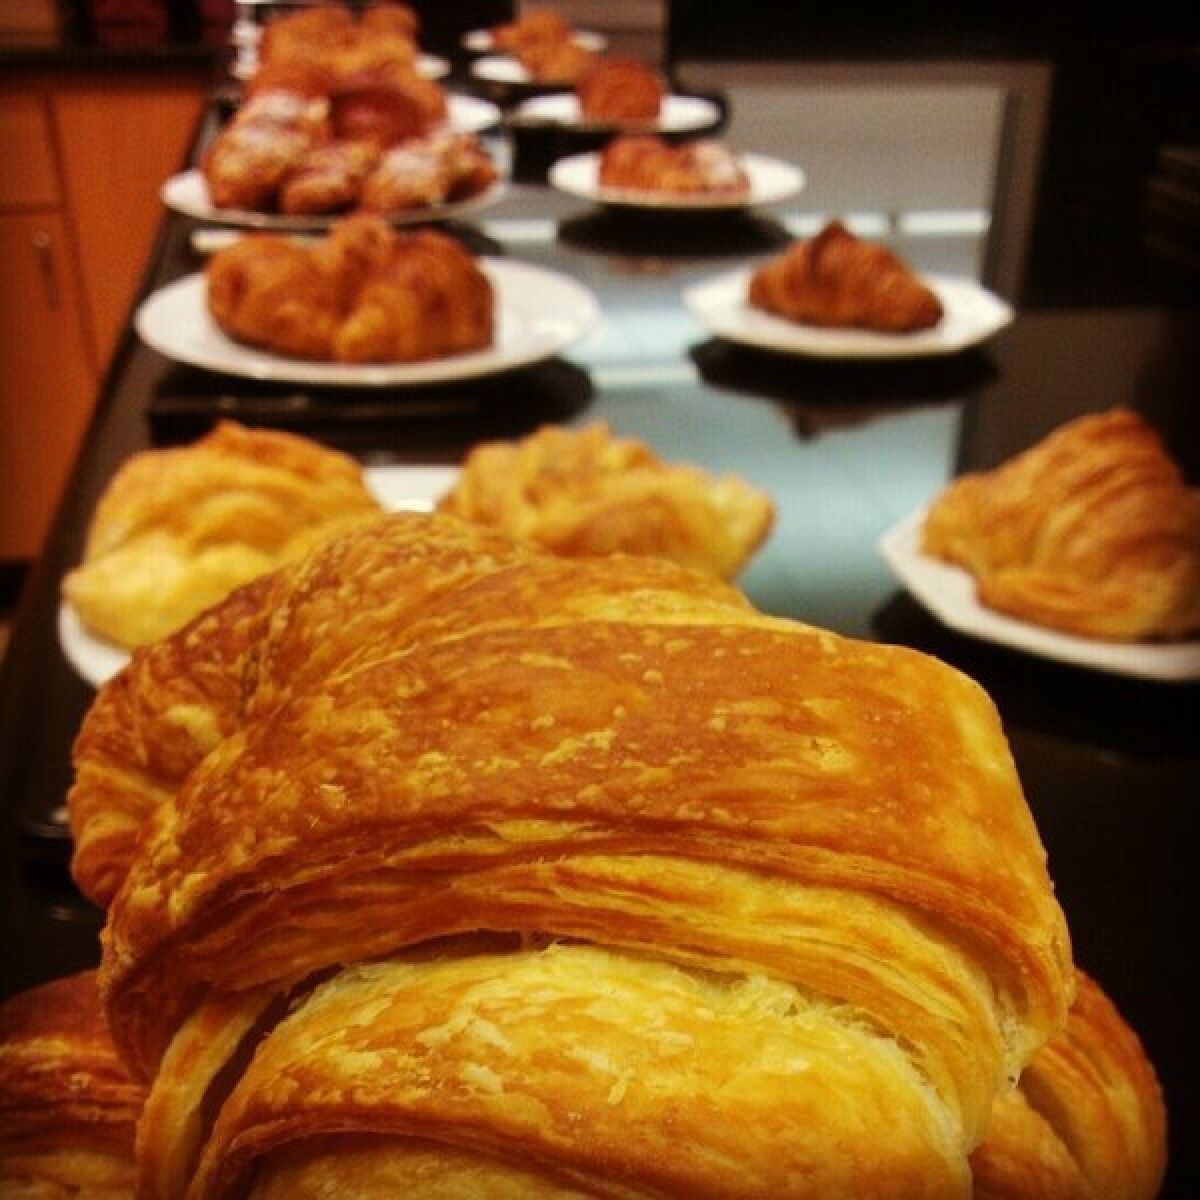 Croissants all lined up for a Times Food staff taste test.